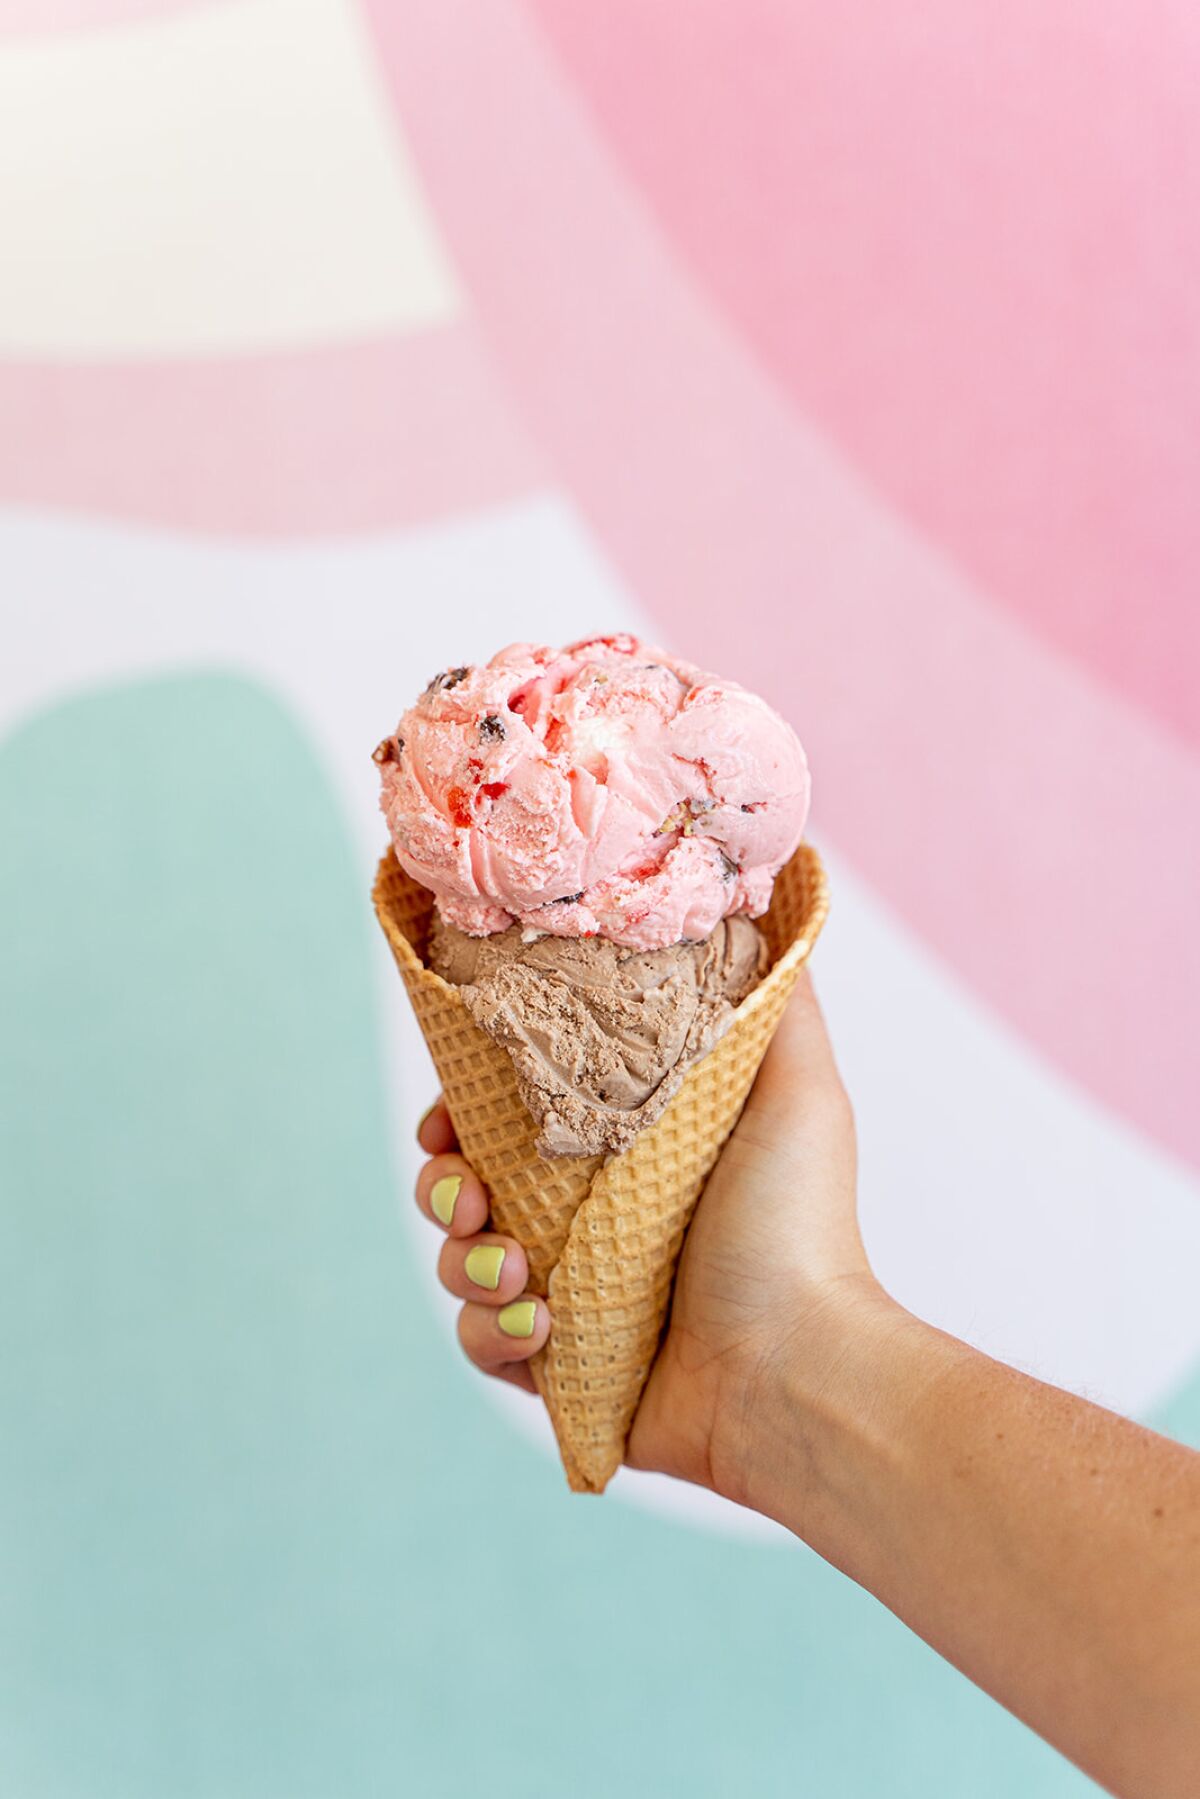 Sadie’s Hand Crafted Mexican Ice Cream holds a rainbow of flavors